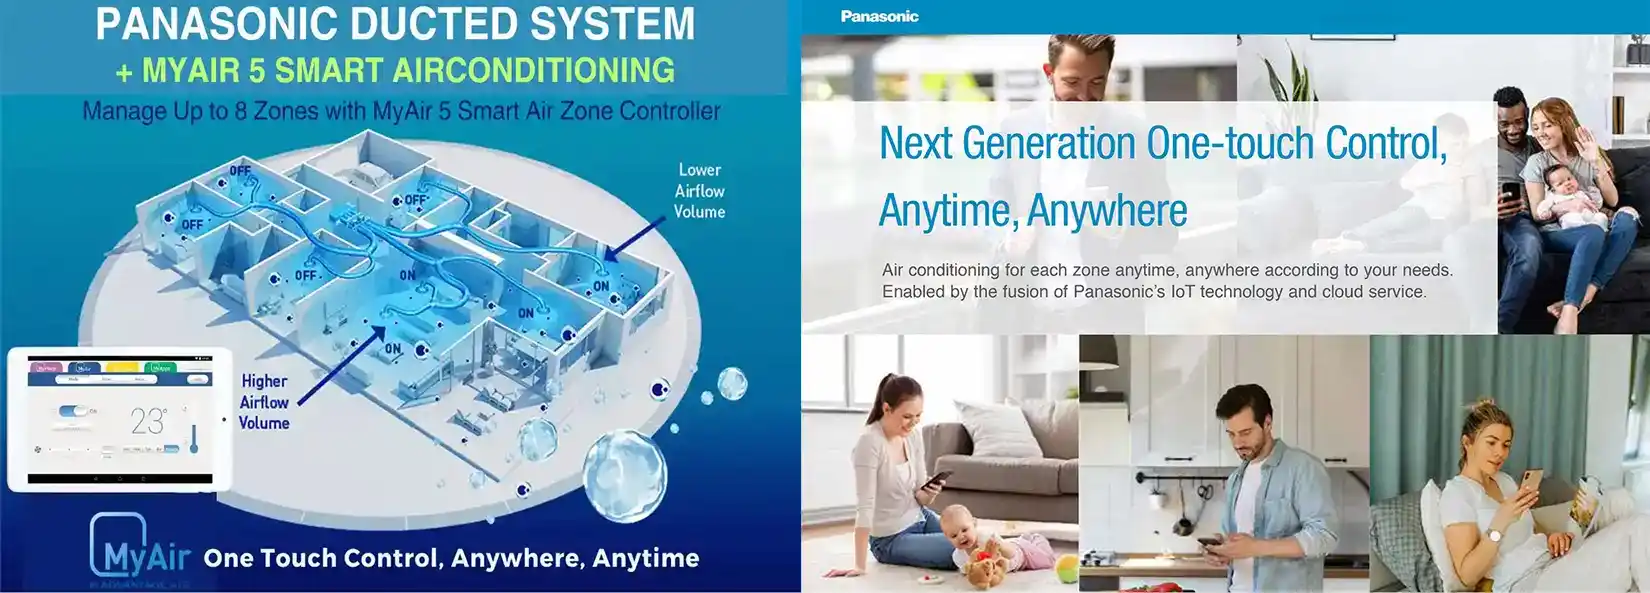 Panasonic ducted air conditioning with myair zone controller available from all cool industries, brendale, brisbane.